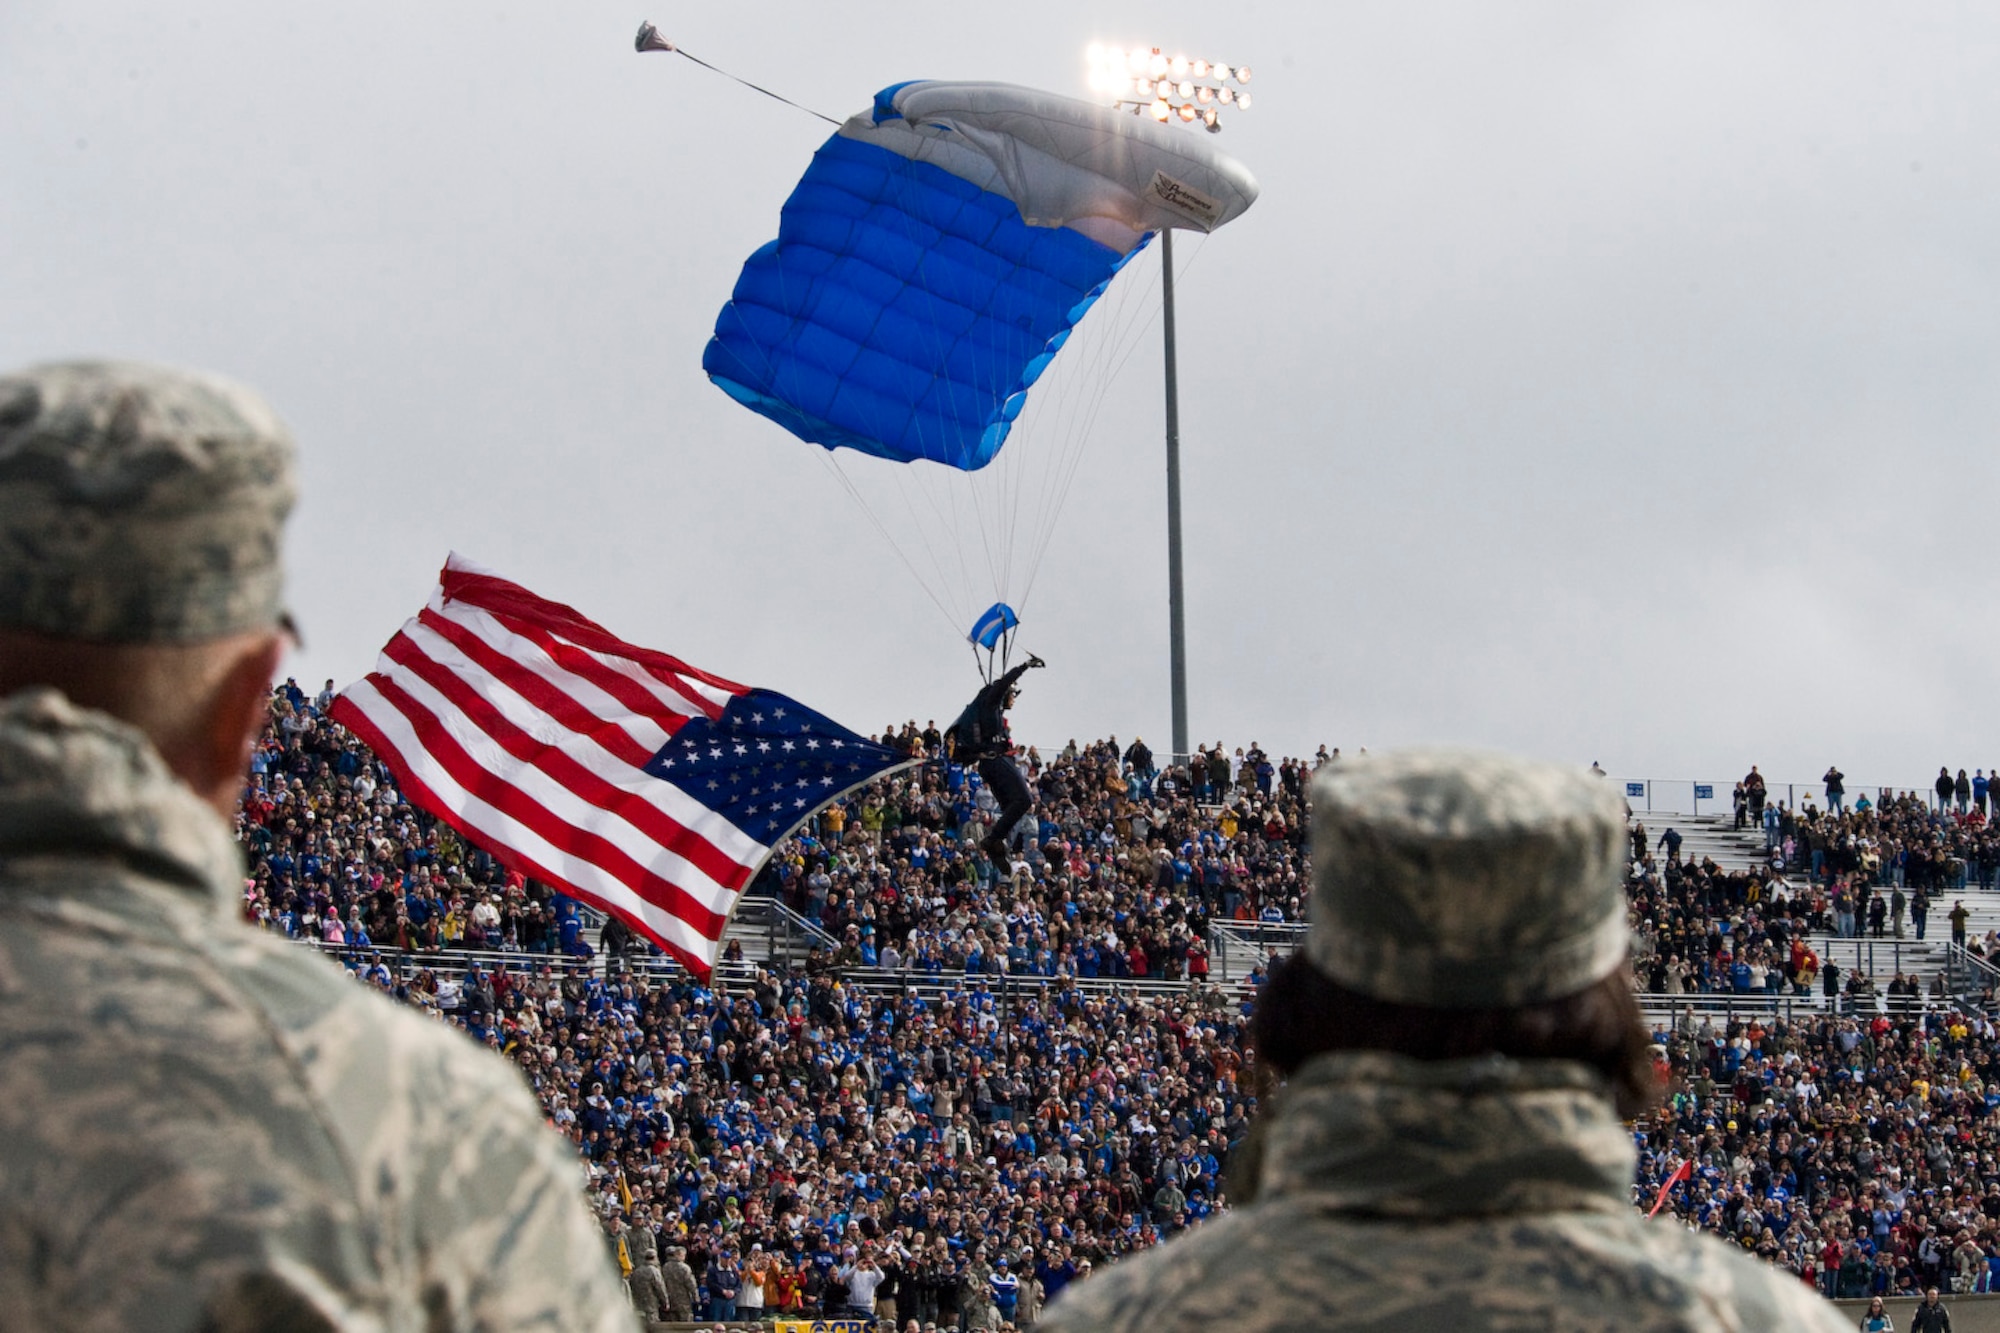 A parachutist glides onto the field before the Air Force Falcons vs. Army Knights football game at the Air Force Academy, Colo., Nov. 5, 2011. The American flag was being carried by one of four jumpers to kick off the football game. (U.S. Air Force photo by Airman Alystria Maurer/Released)